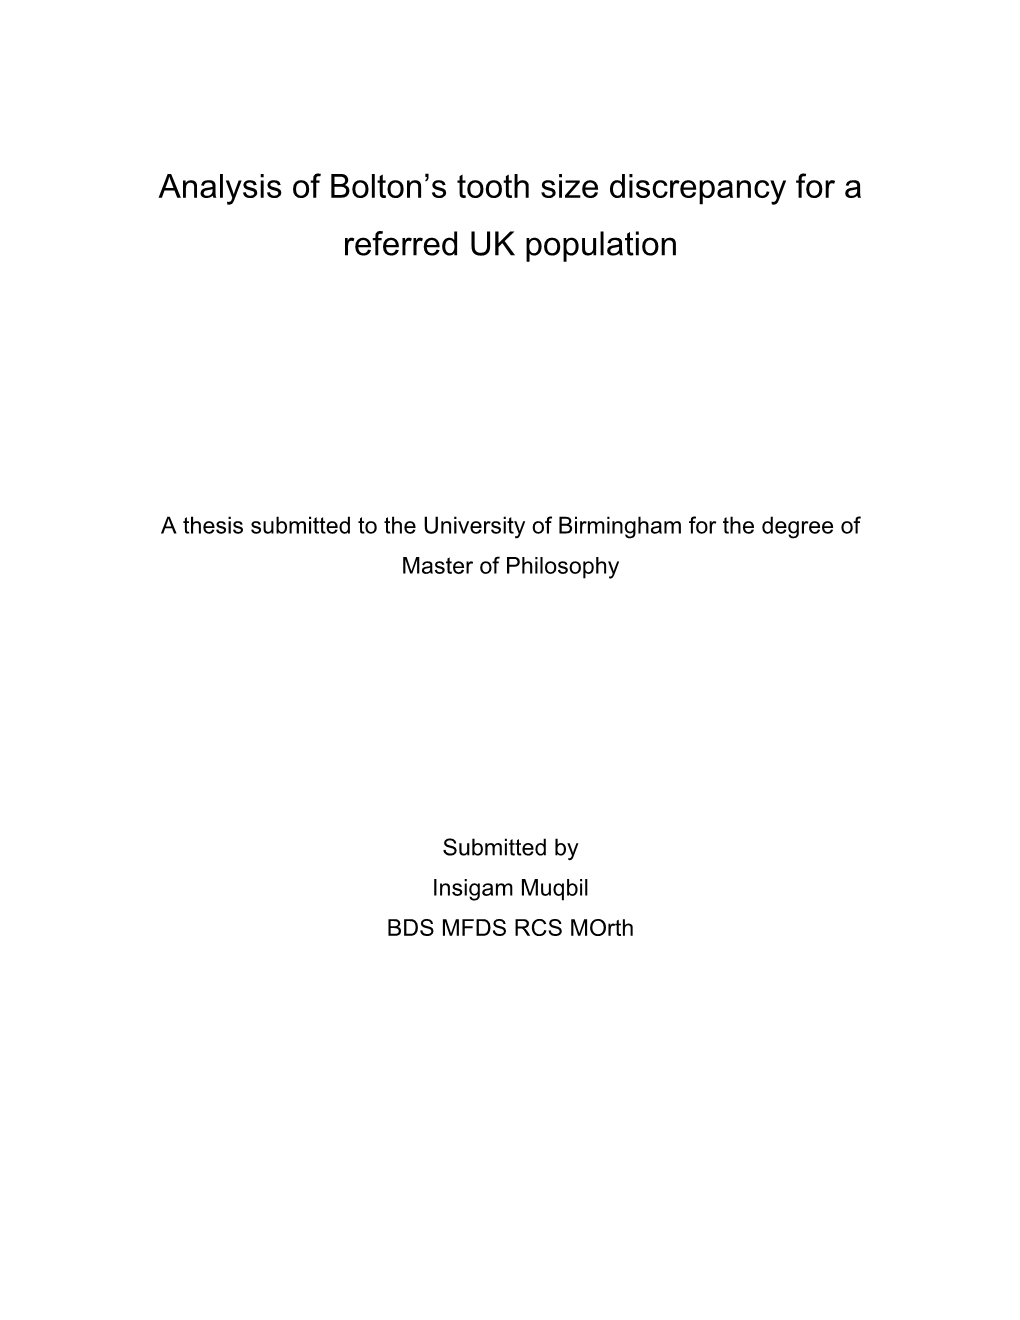 Analysis of Bolton's Tooth Size Discrepancy for a Referred UK